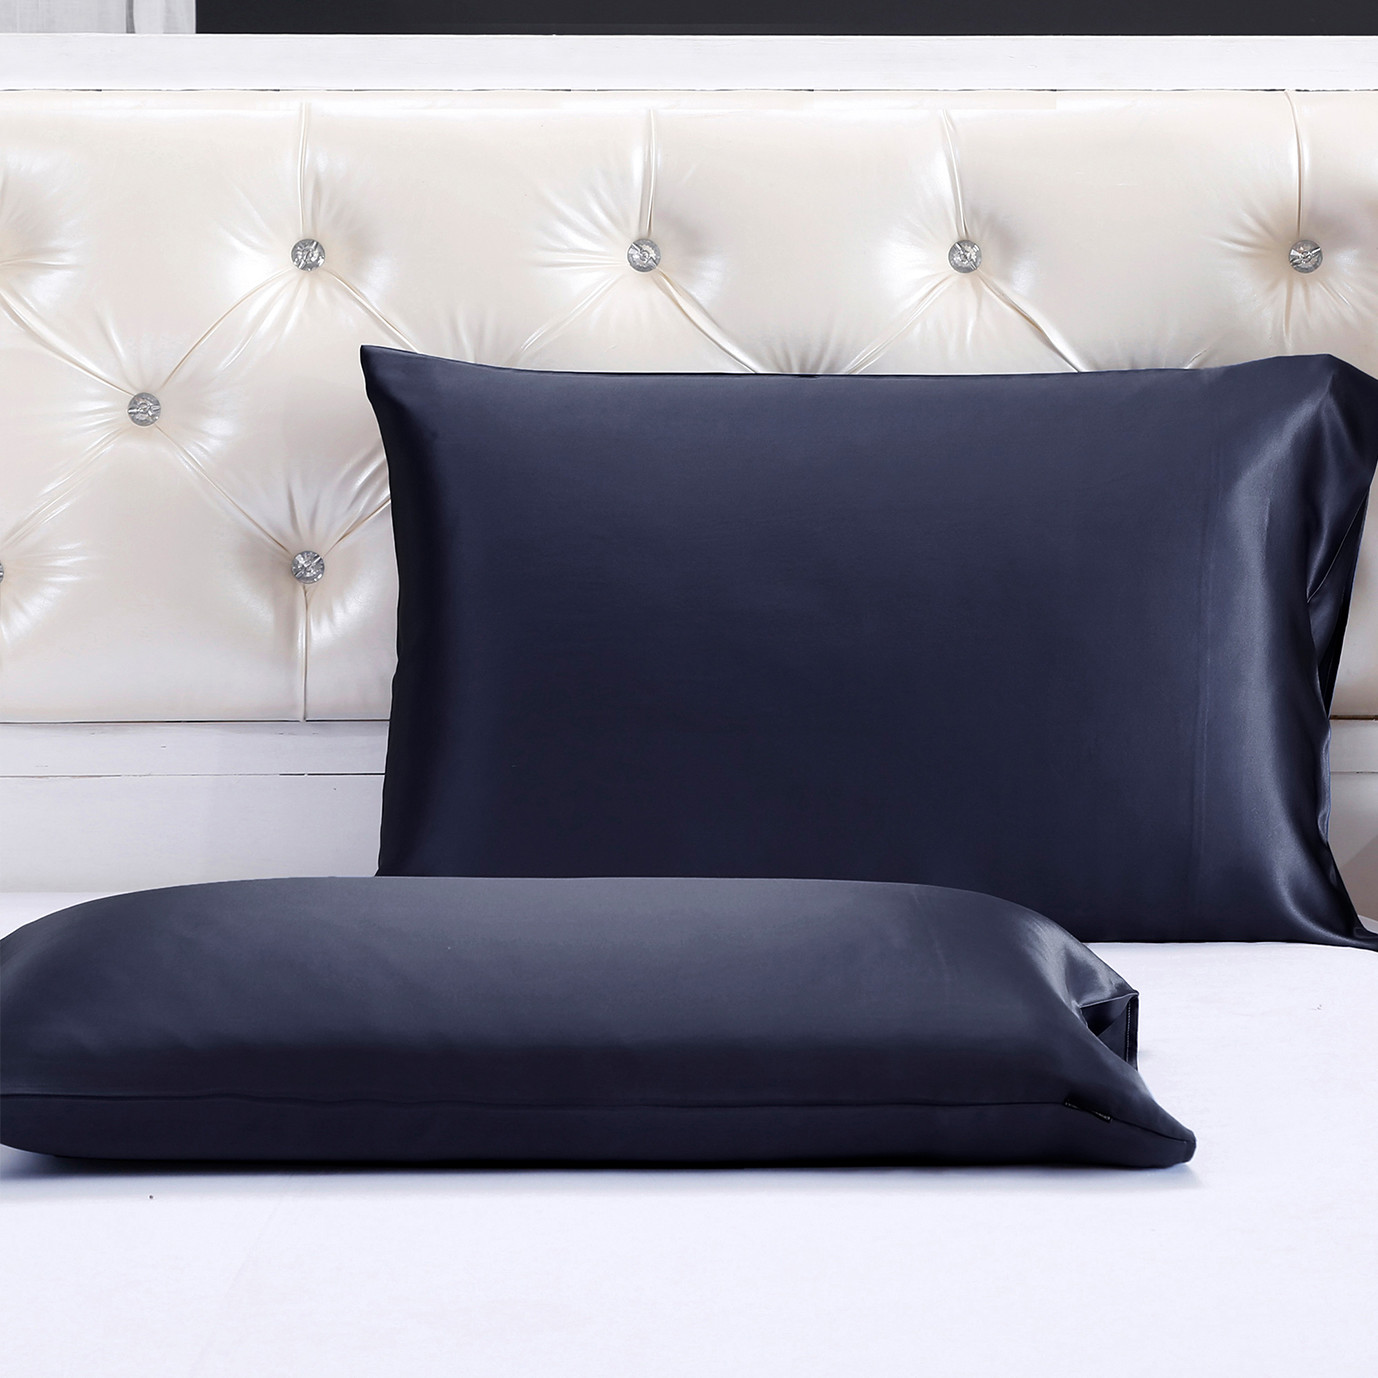 Buy Luxurious Silk Pillowcase of Sheets from karaz linen online and get a exulde brand with colour